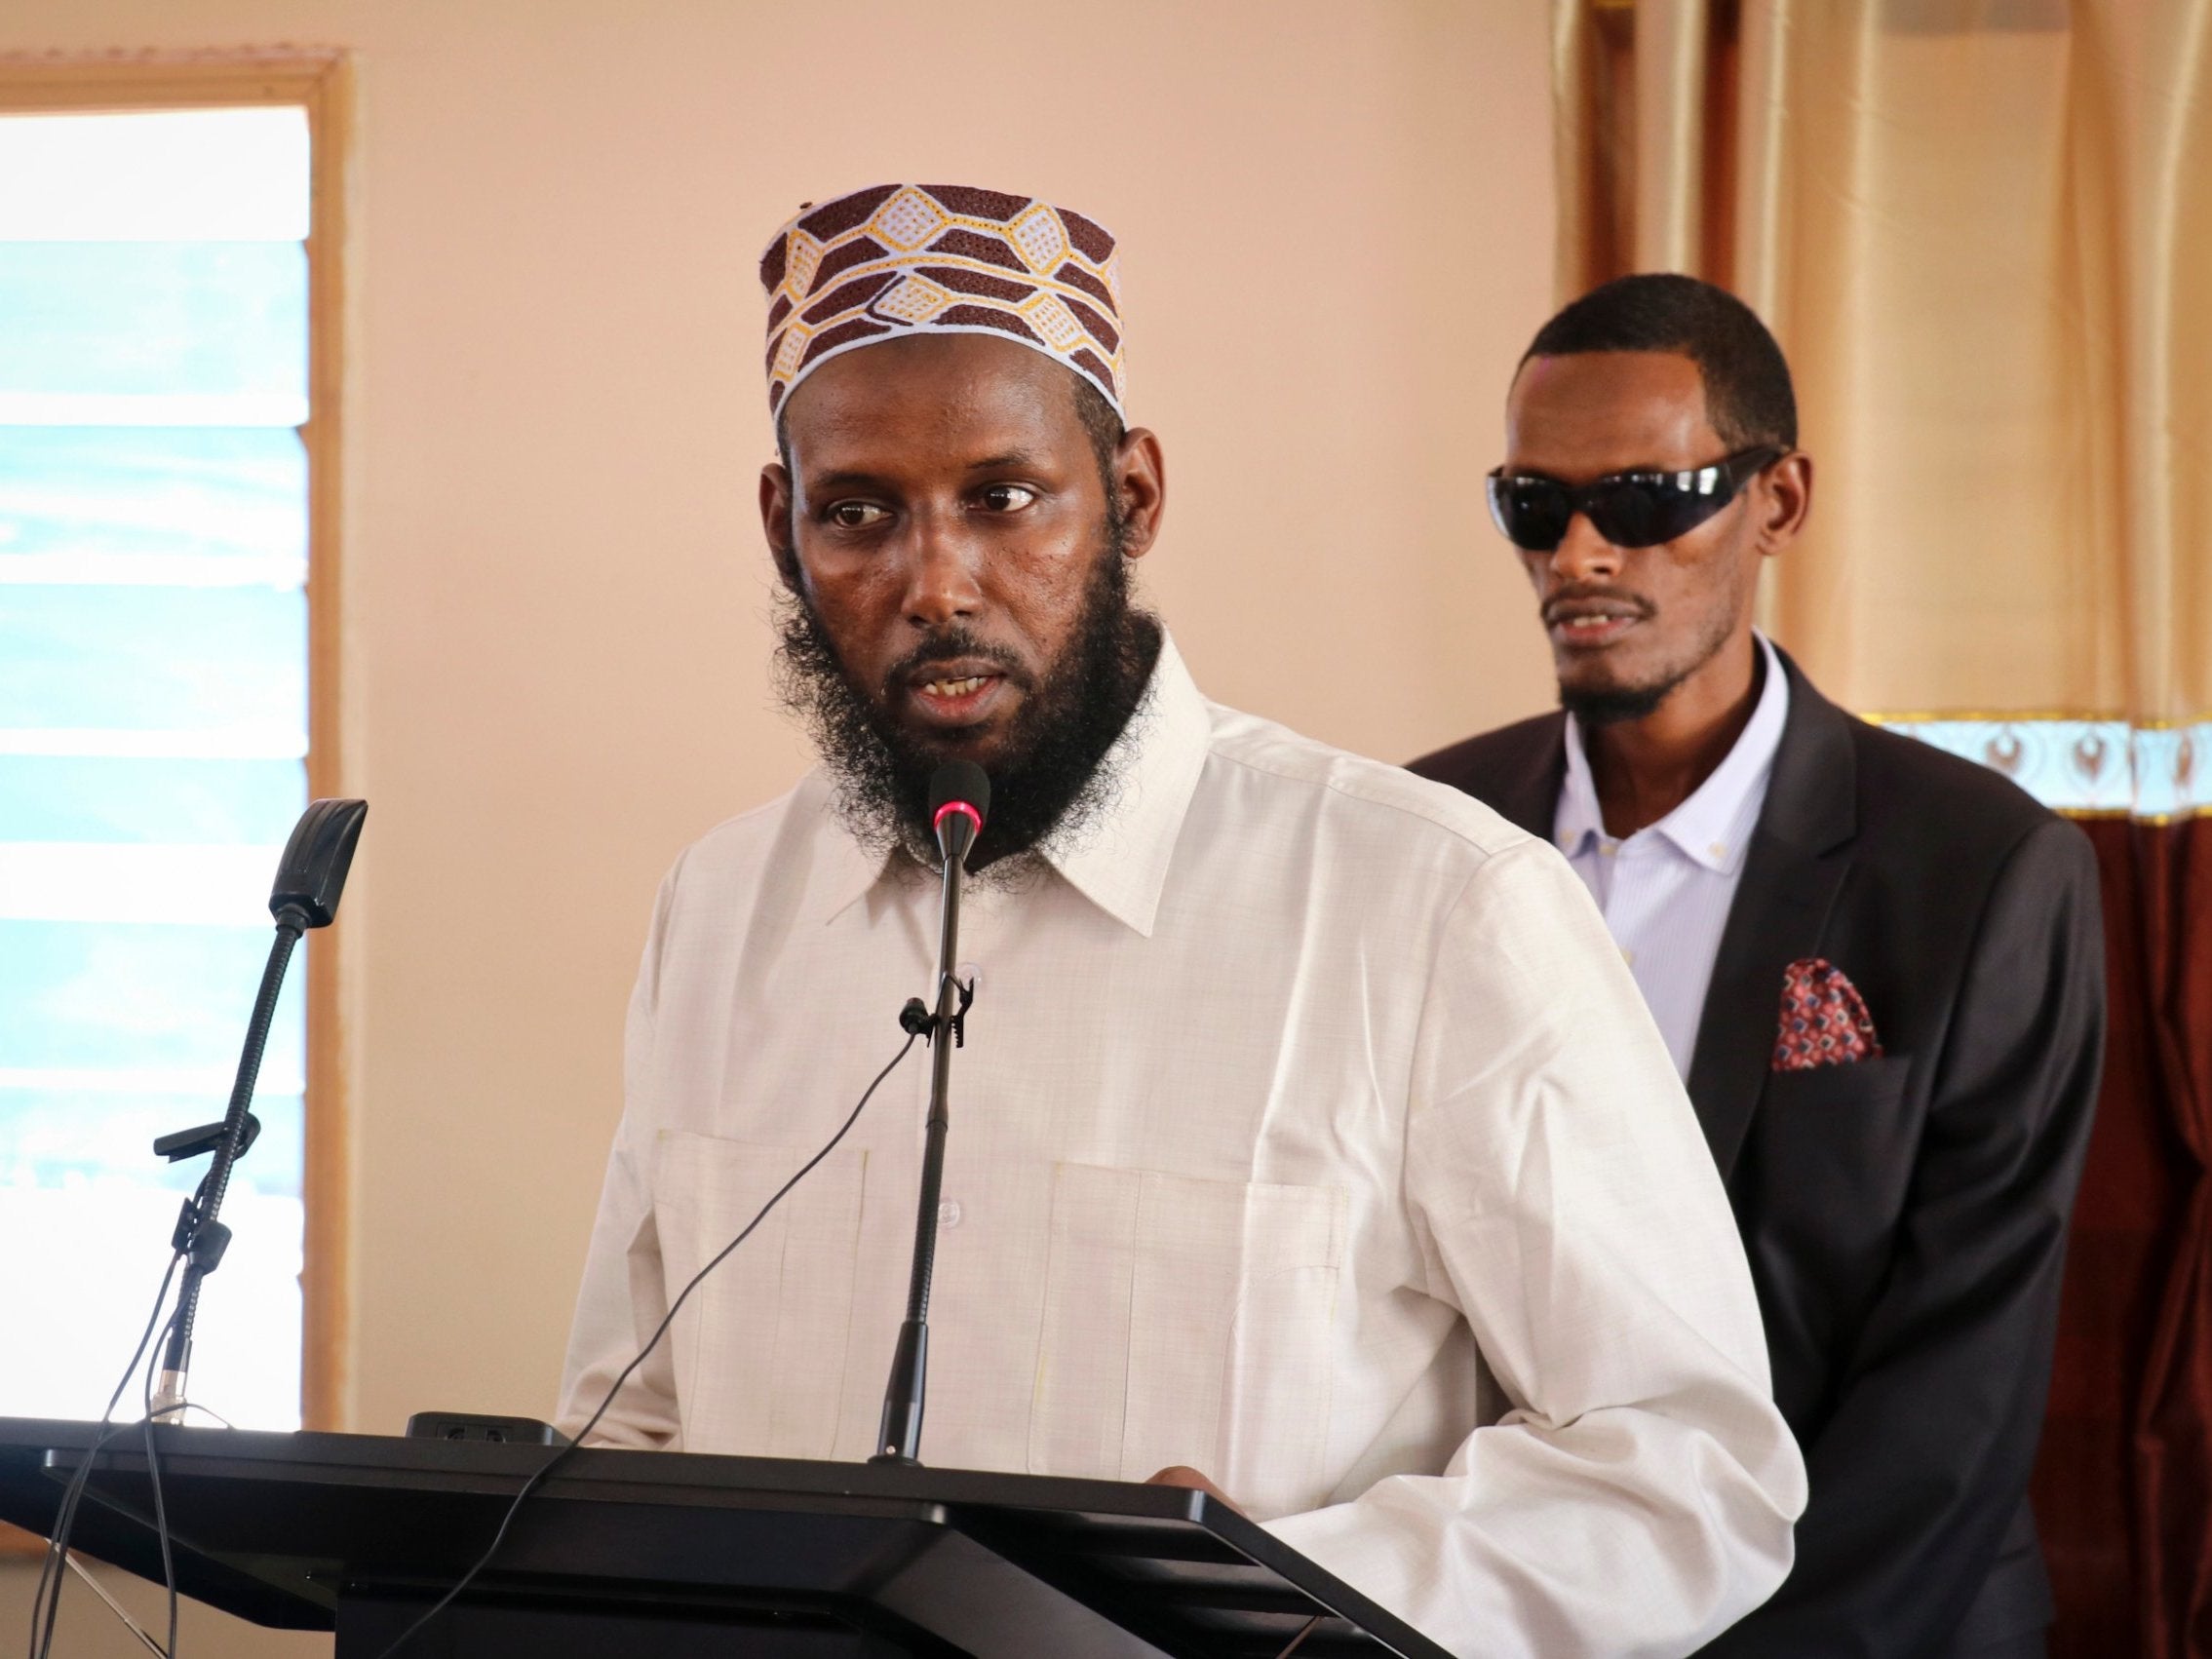 Nicholas Haysom was asked to leave after he questioned the arrest of Mukhtar Robow (pictured), a former al-Shabaab figure who had defected previously